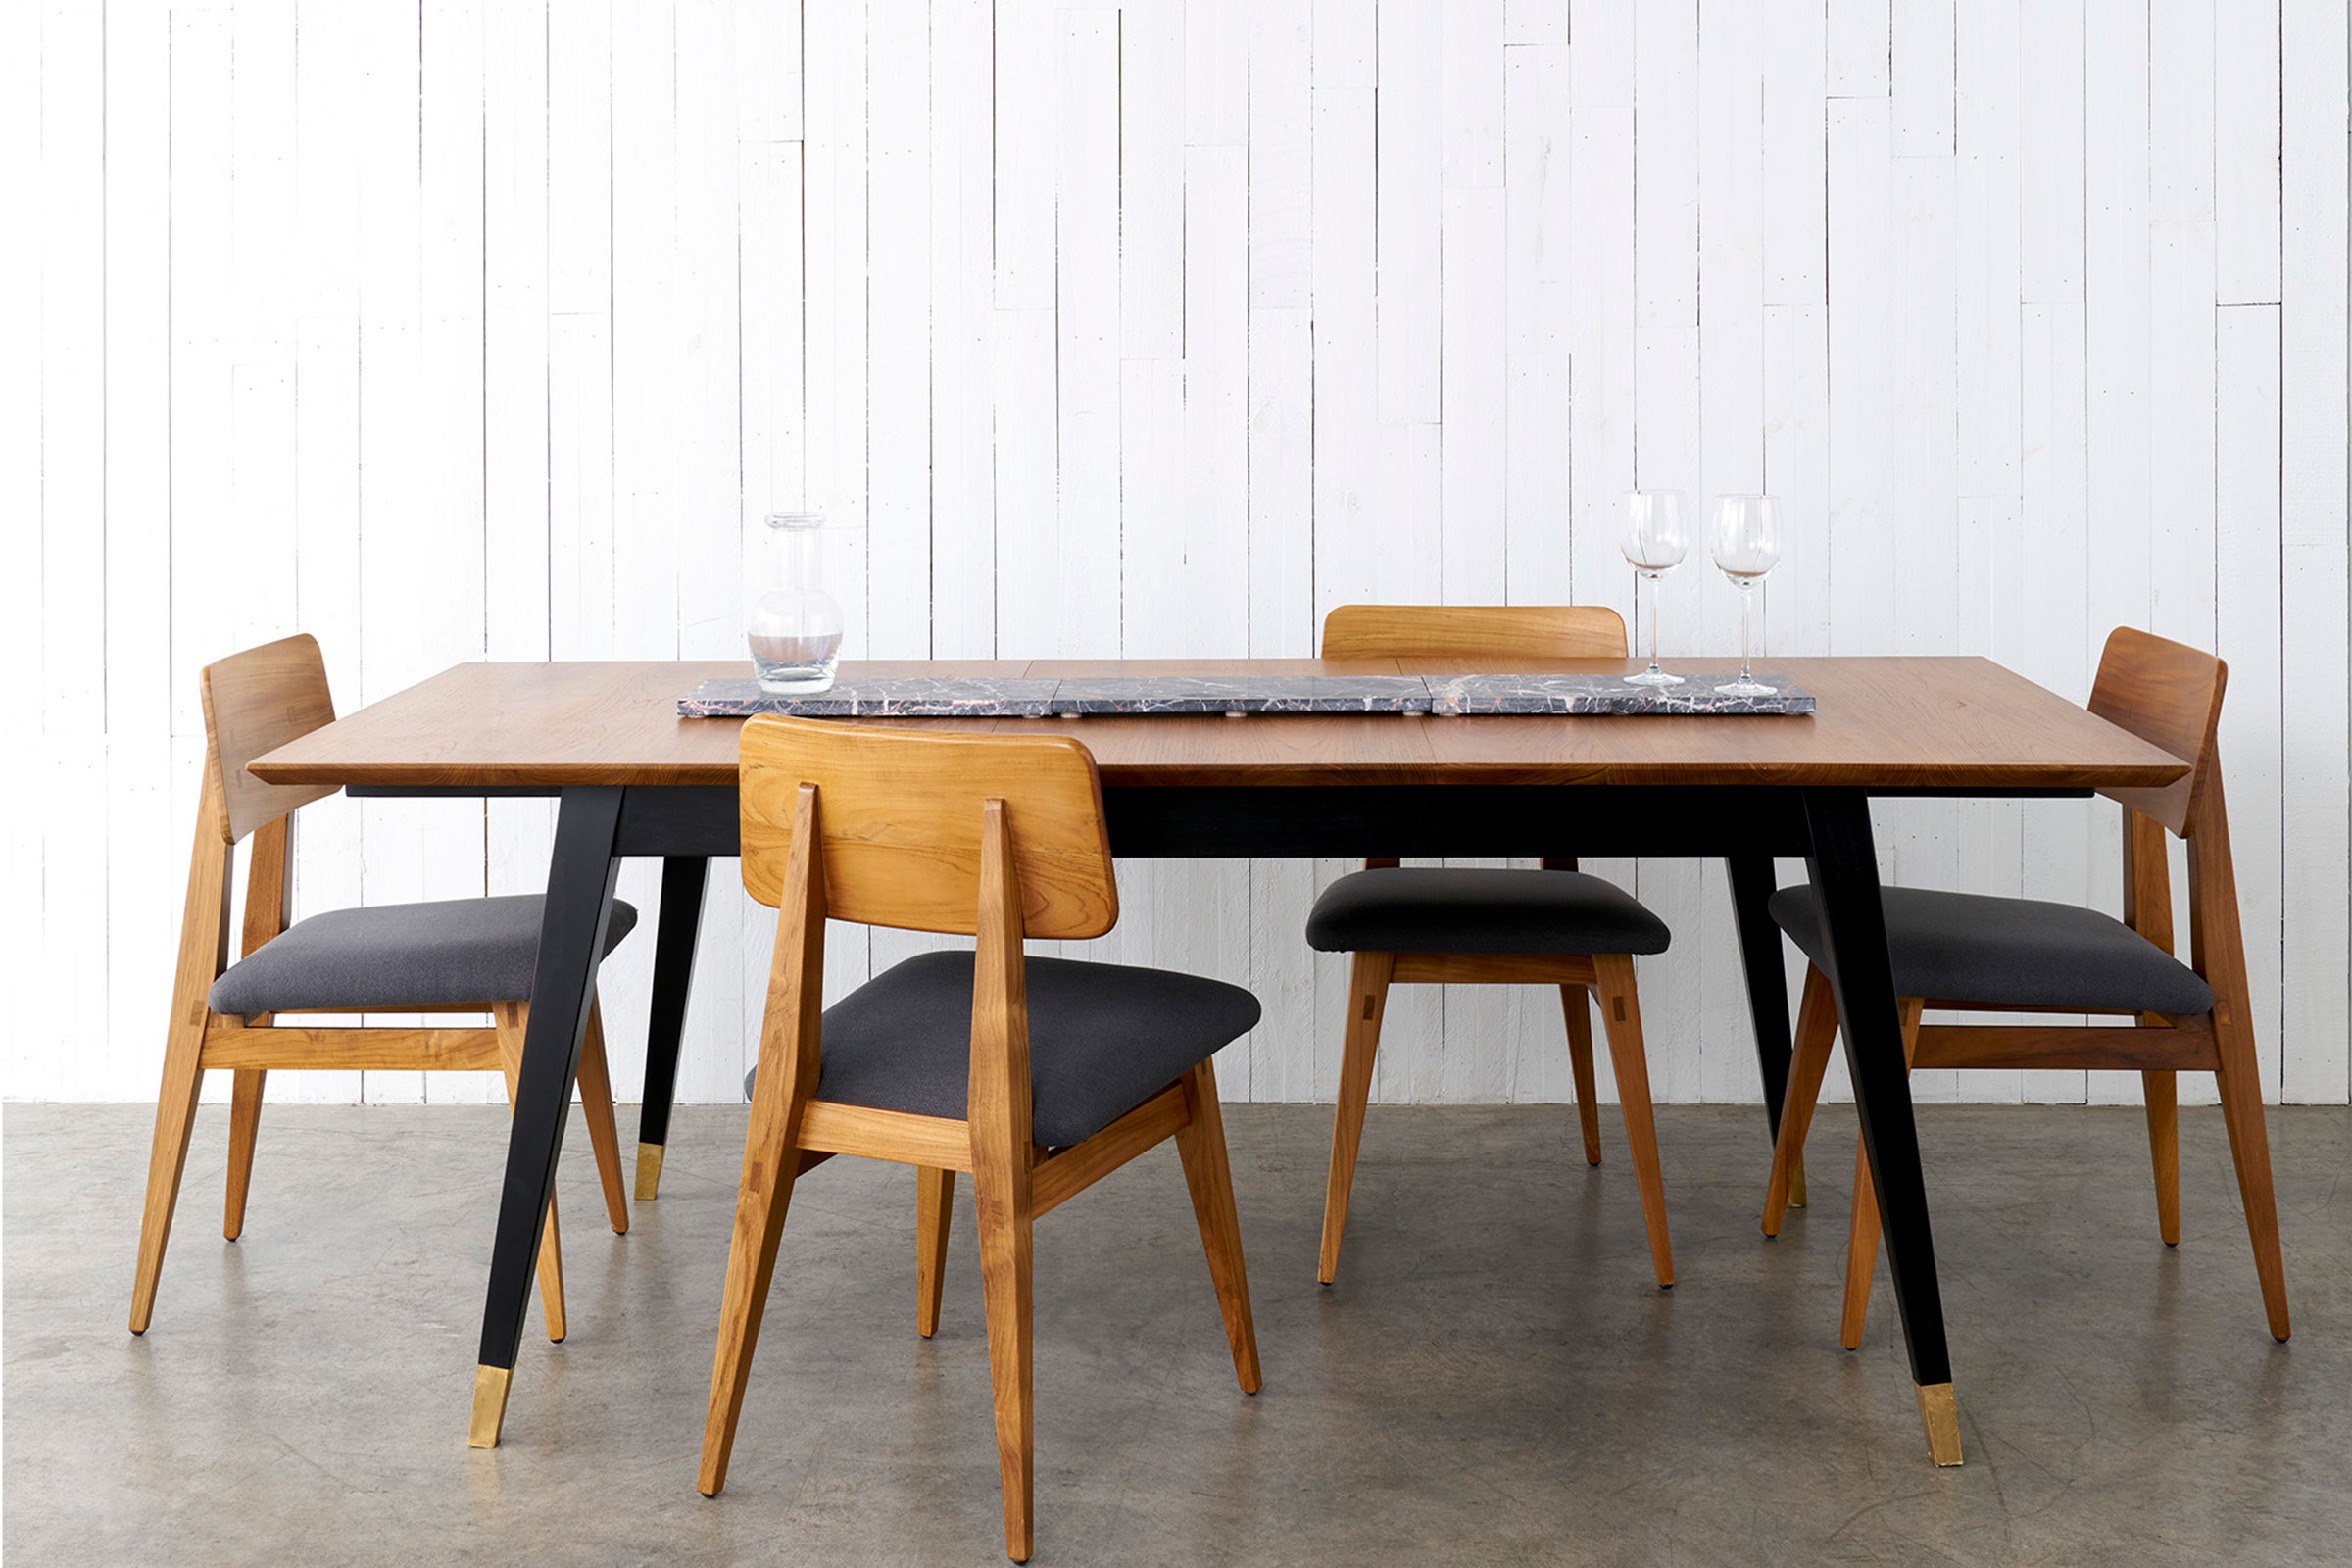  Alongside the winners we had a few more favourites, including the Vinny dining setting by Sydney-based  REDDIE  